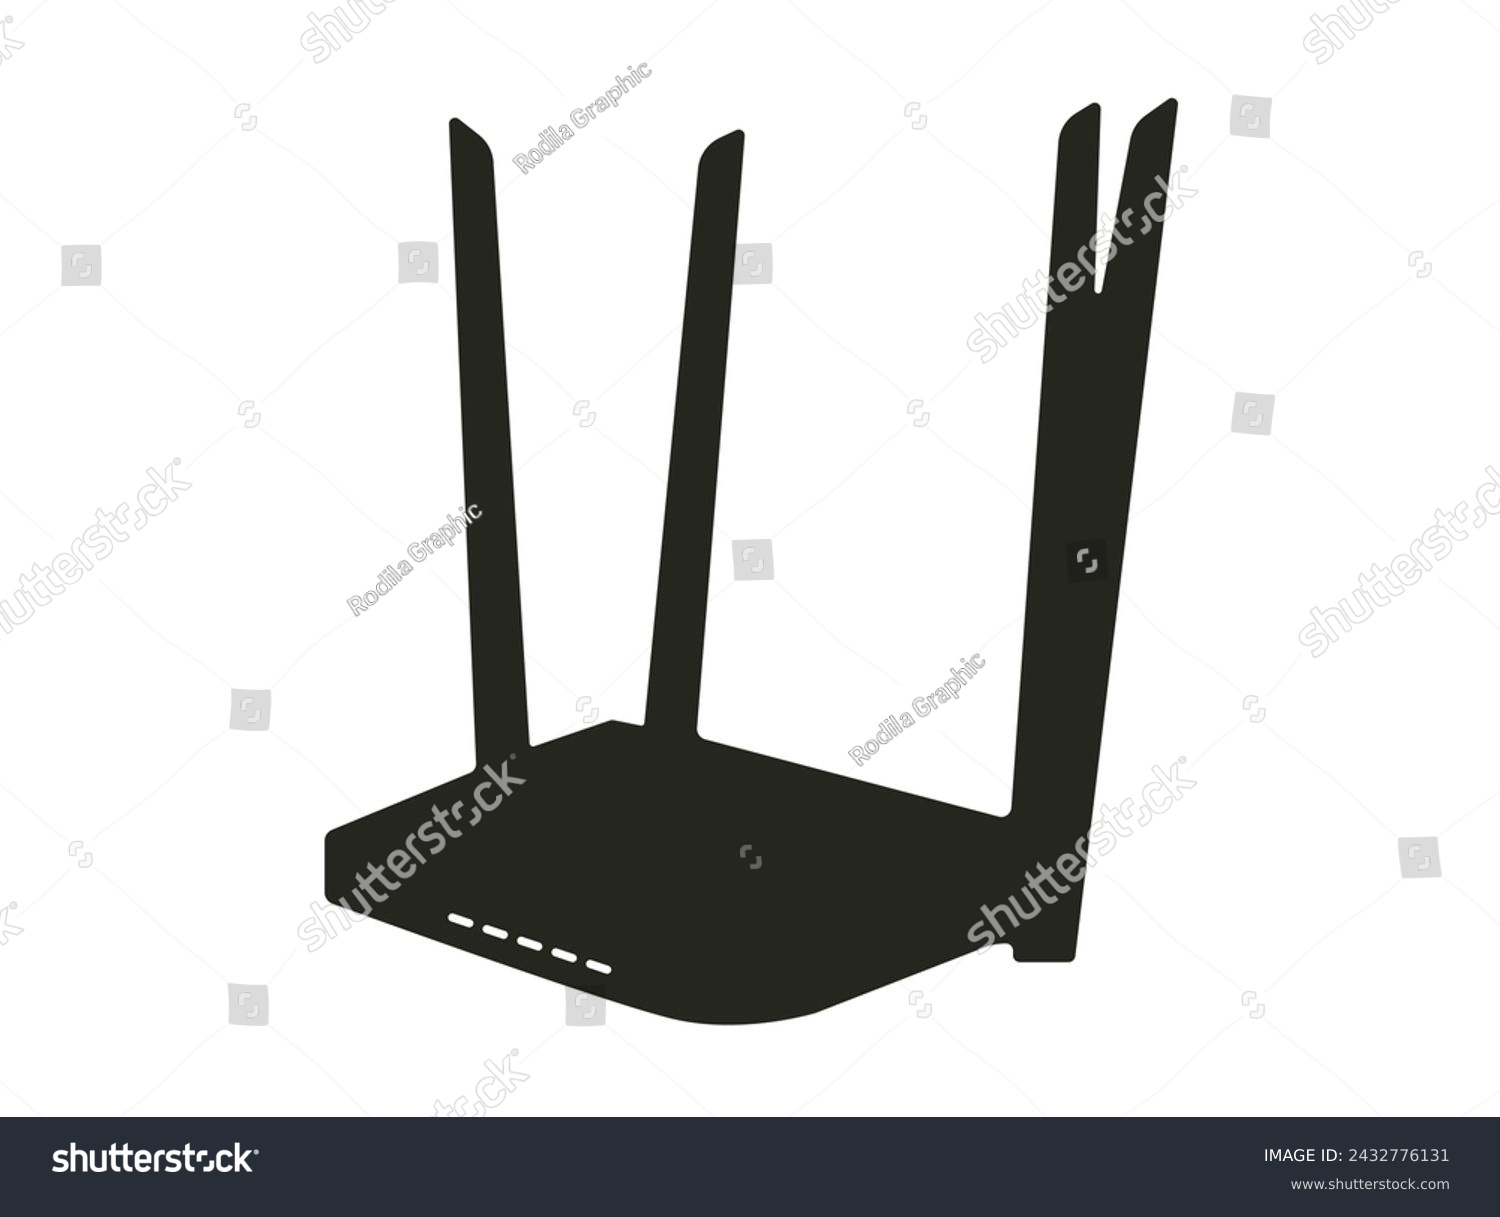 SVG of Enhance your home network with our powerful Wi-Fi router. Enjoy seamless connectivity, blazing-fast speeds, and robust security features for all your devices svg